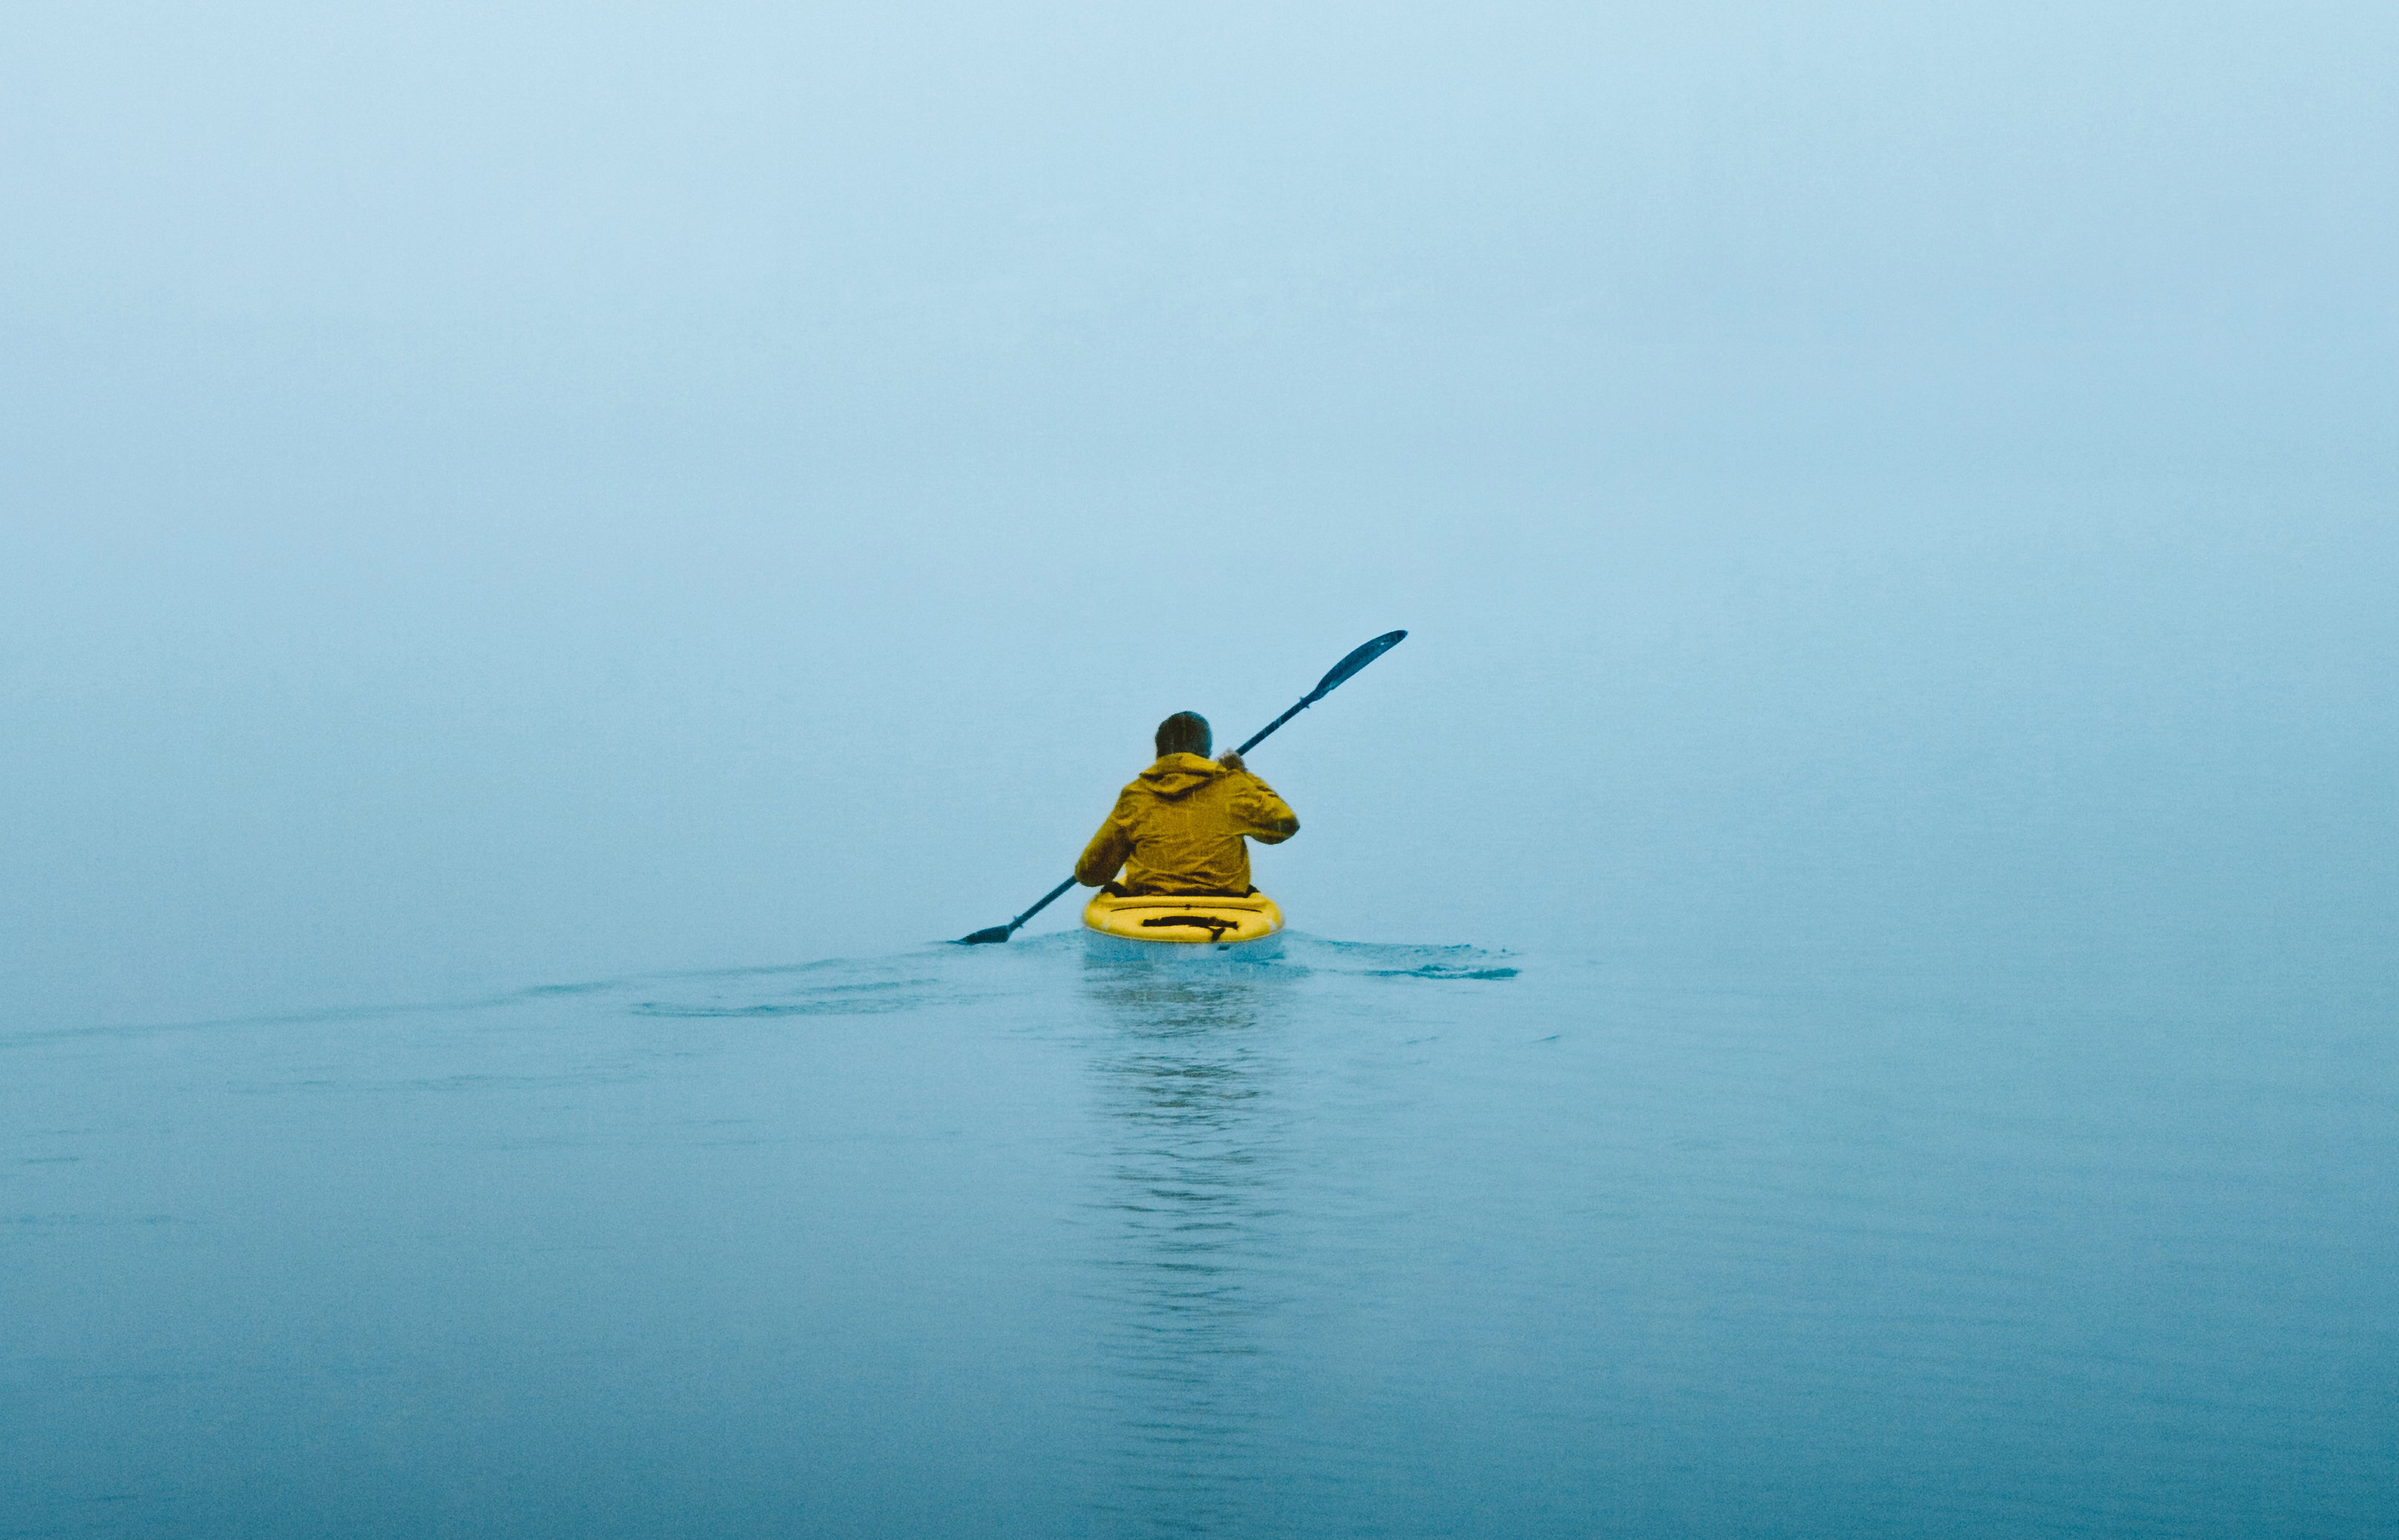 The Kayak and the Connected Product